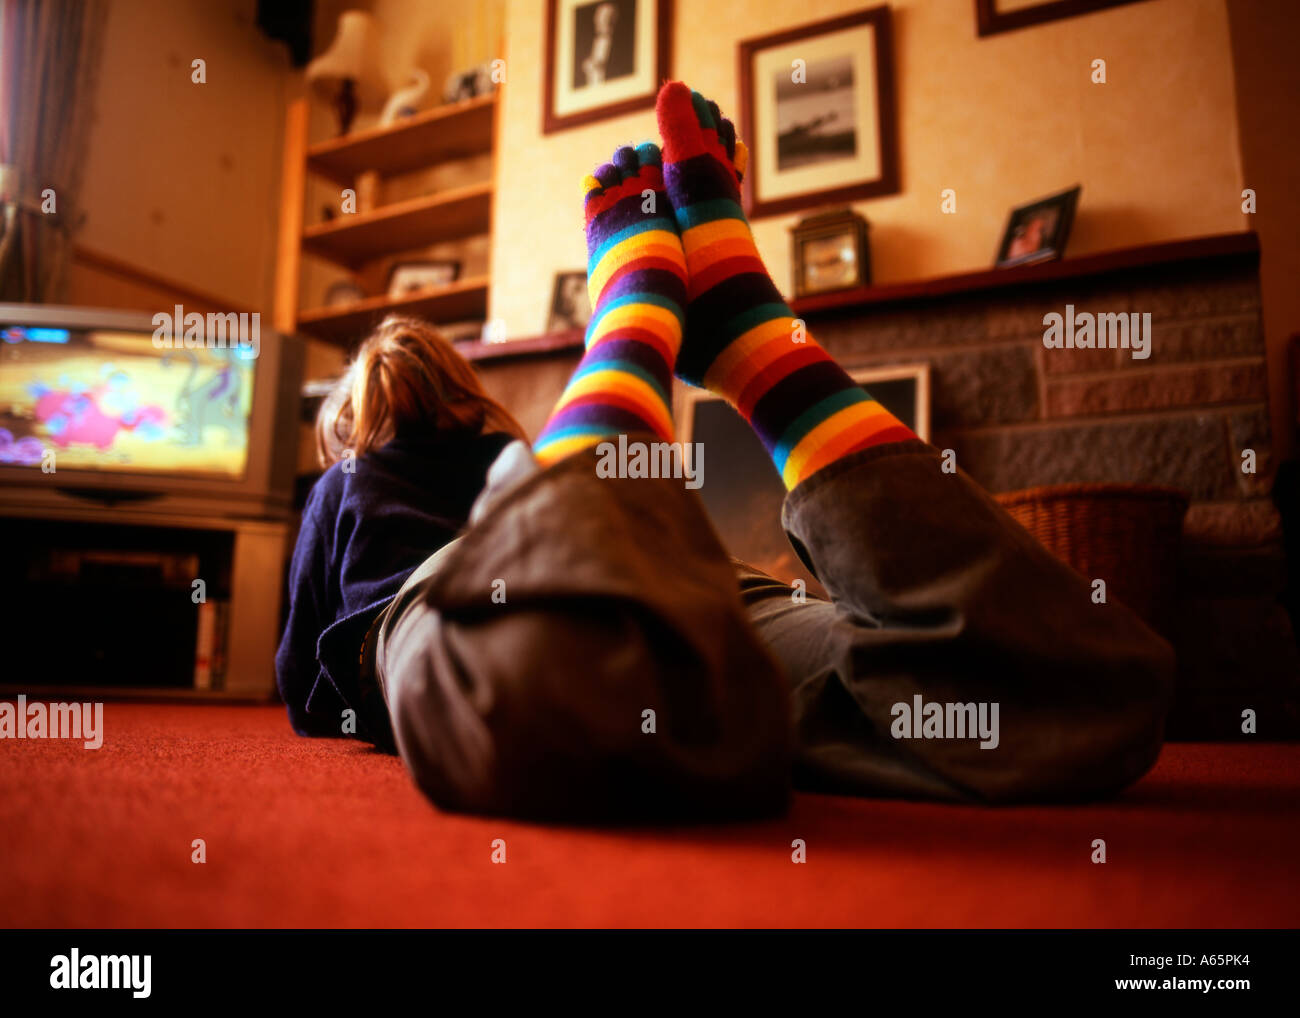 https://c8.alamy.com/comp/A65PK4/young-girl-watching-the-tv-in-rainbow-coloured-toe-socks-A65PK4.jpg